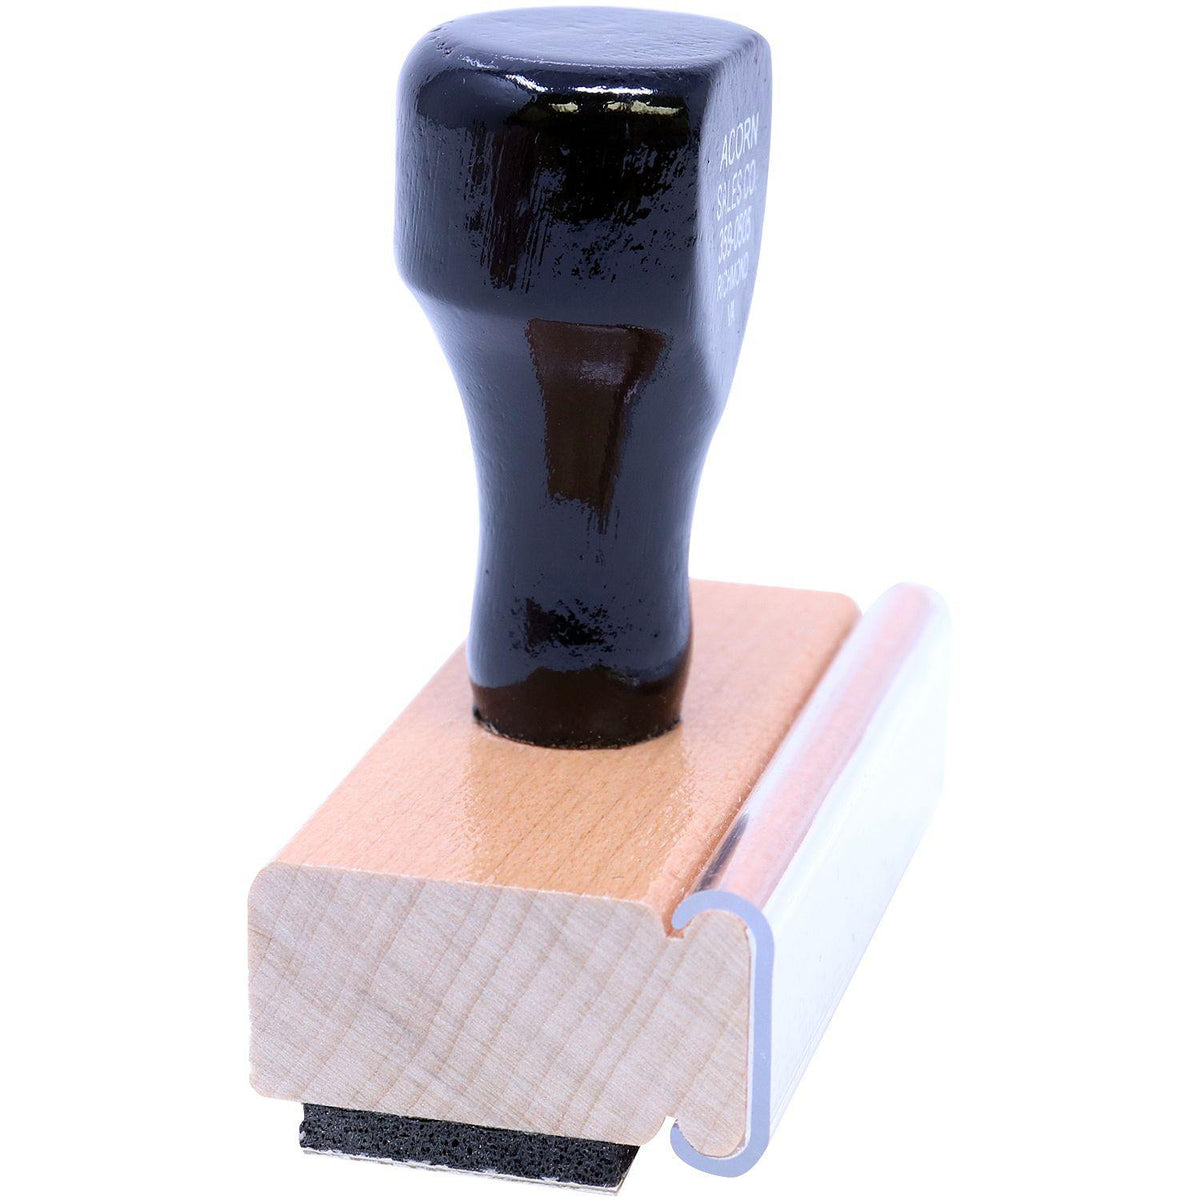 Side View of Application Incomplete Rubber Stamp at an Angle